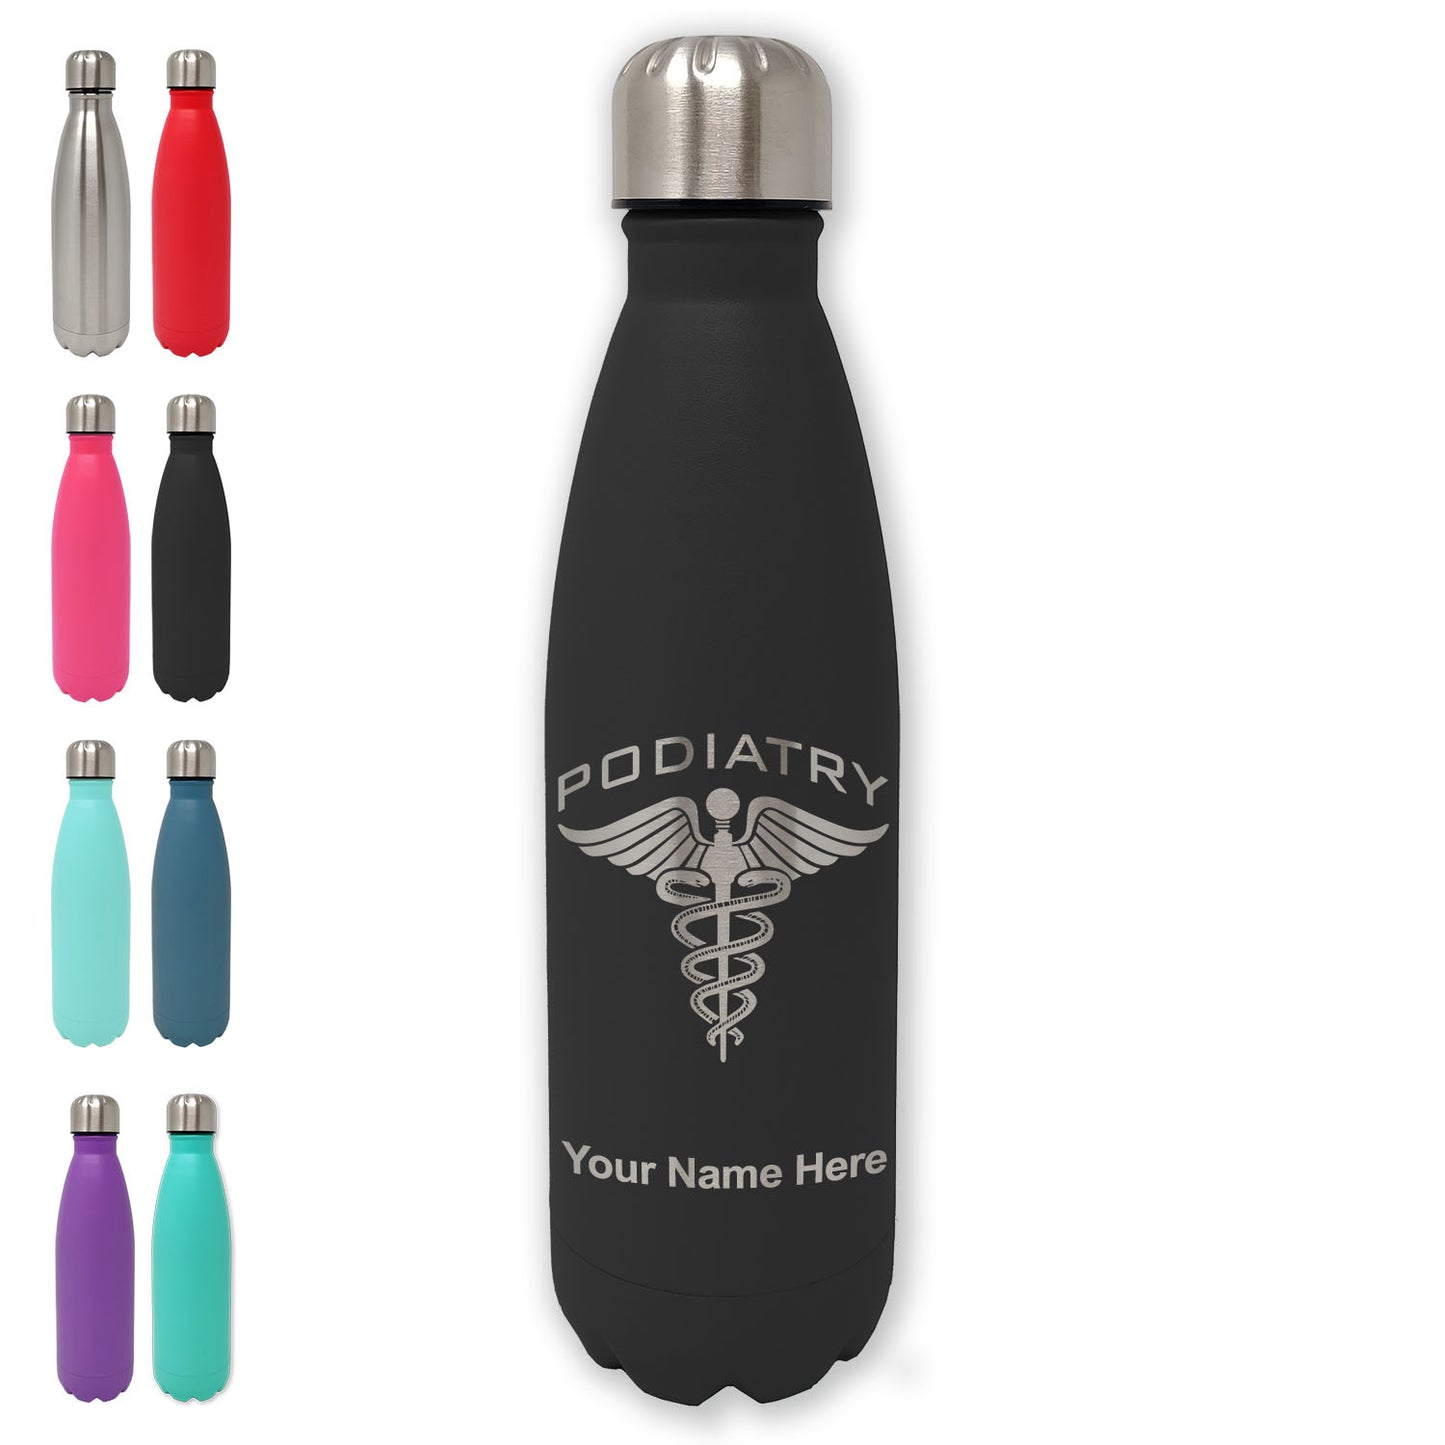 LaserGram Double Wall Water Bottle, Podiatry, Personalized Engraving Included